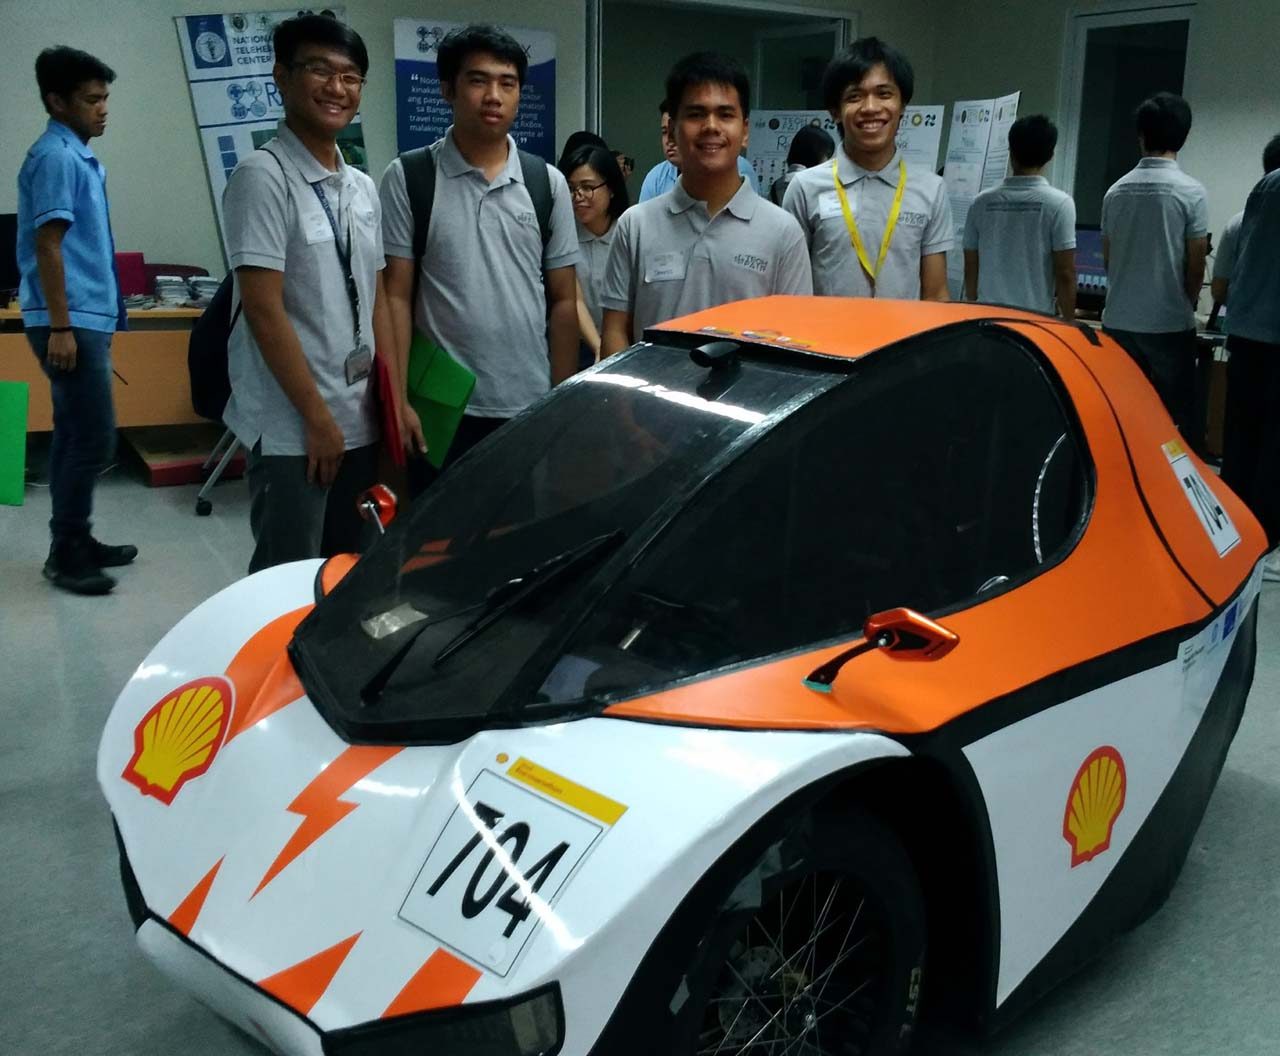 SPEEDING AHEAD. The Philippines' 'Siglo' electric car bags 2nd place honors at 2017 Shell Eco-Marathon event. Photo by Edd K. Usman/Rappler 